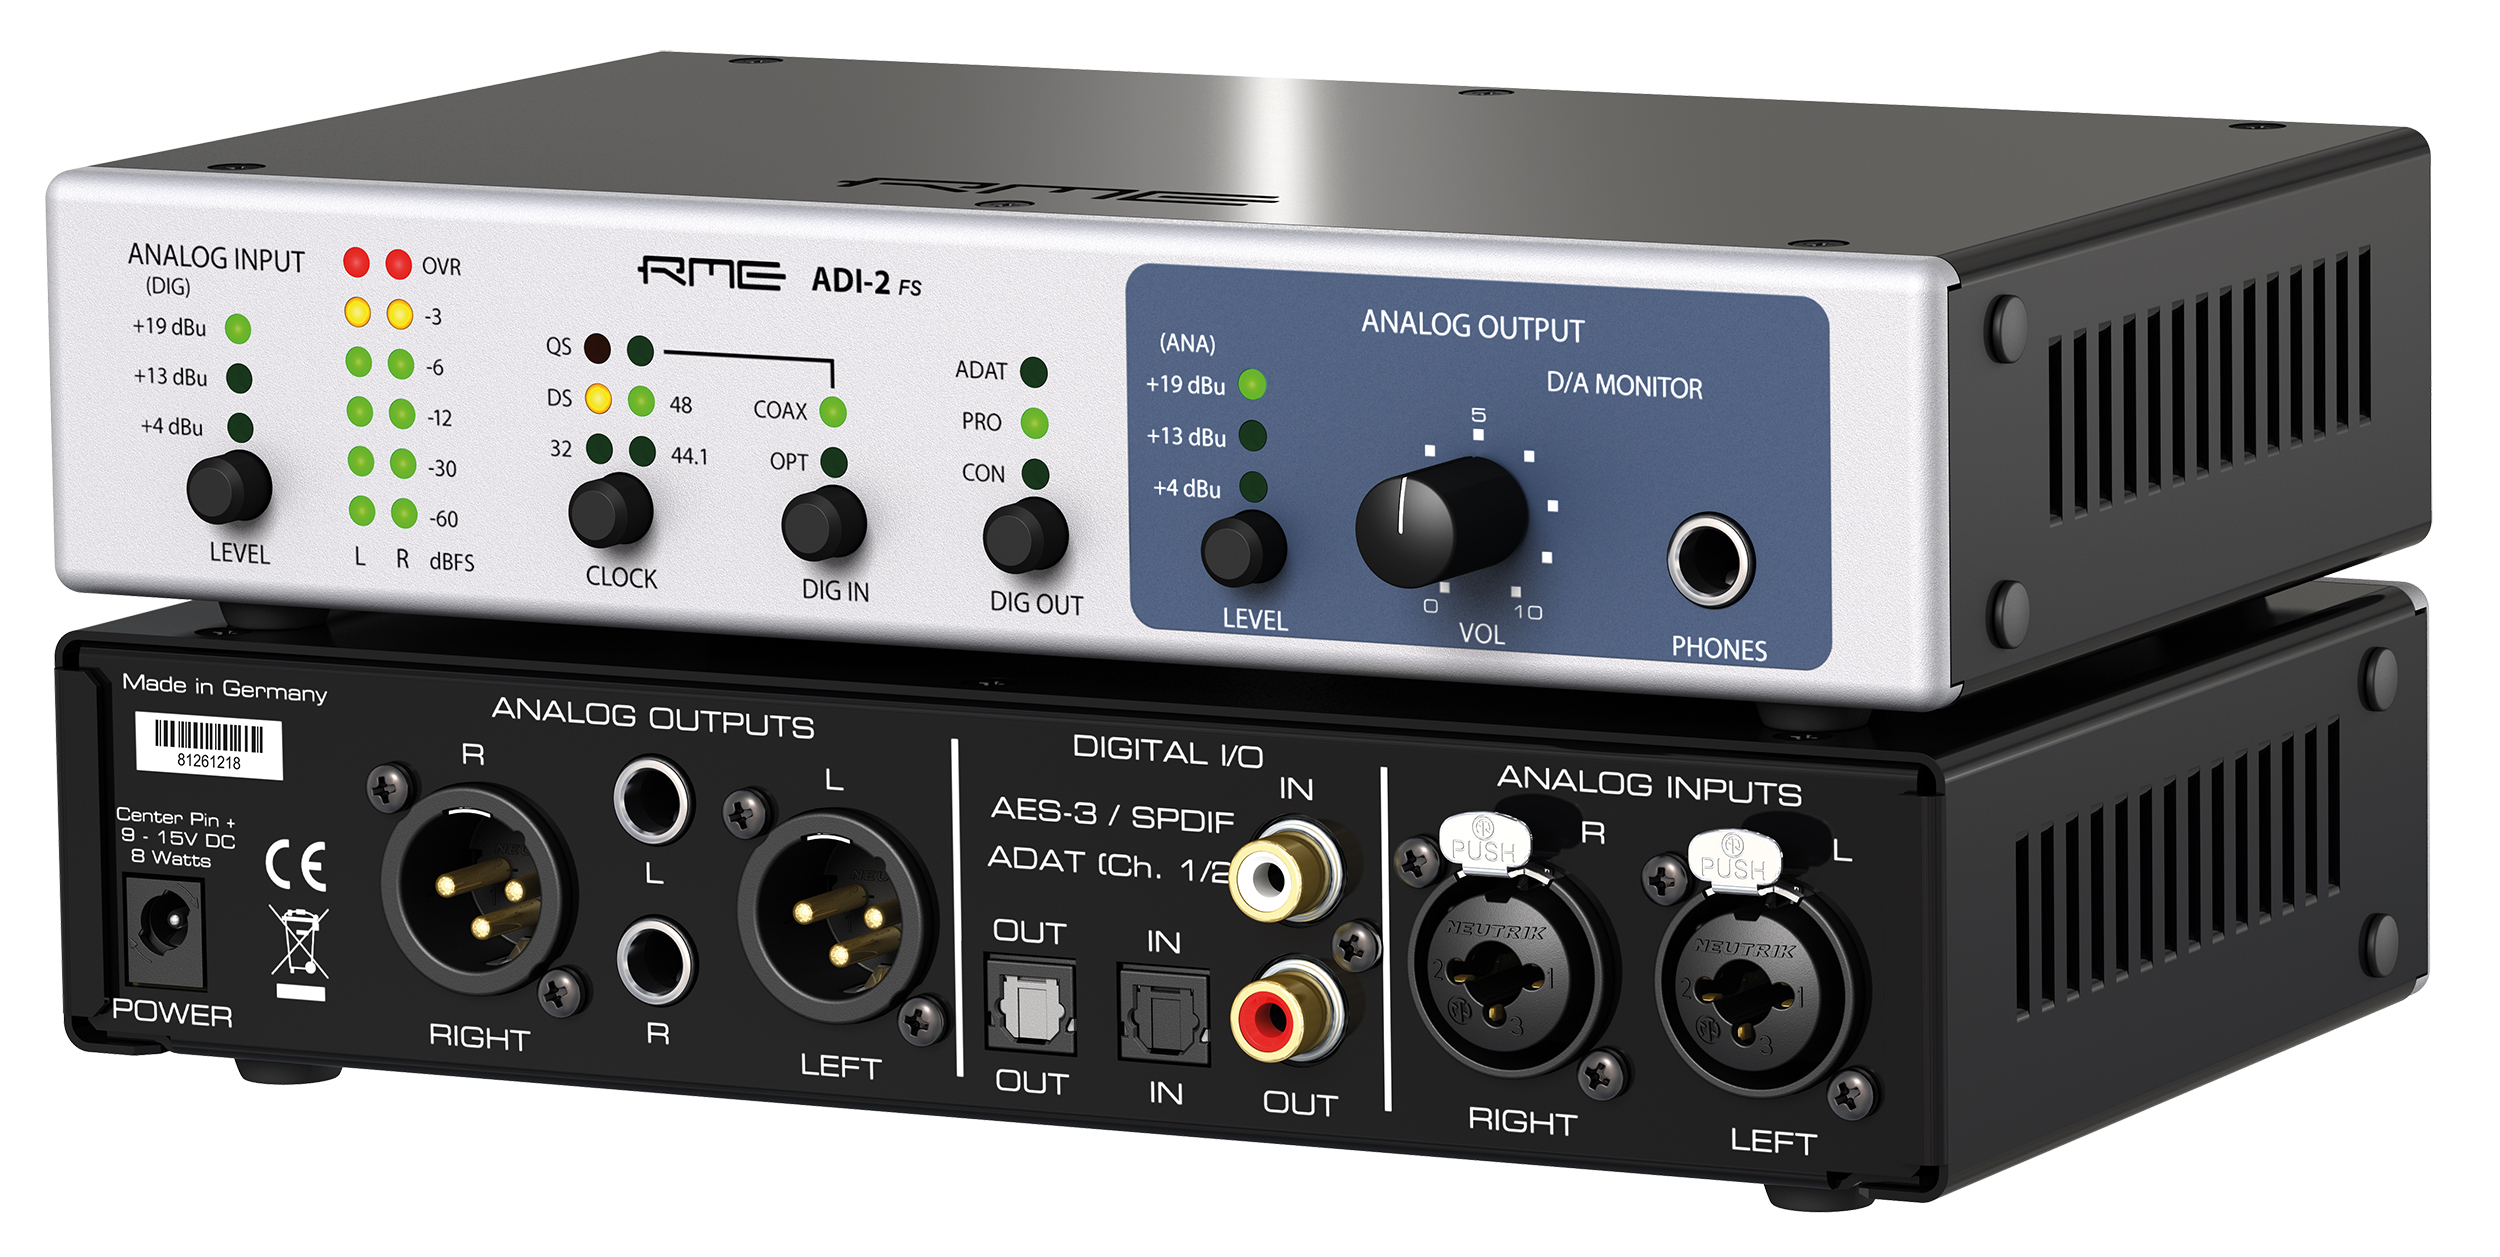 http://www.rme-audio.de/images/products/products_adi-2_fs_1b.jpg